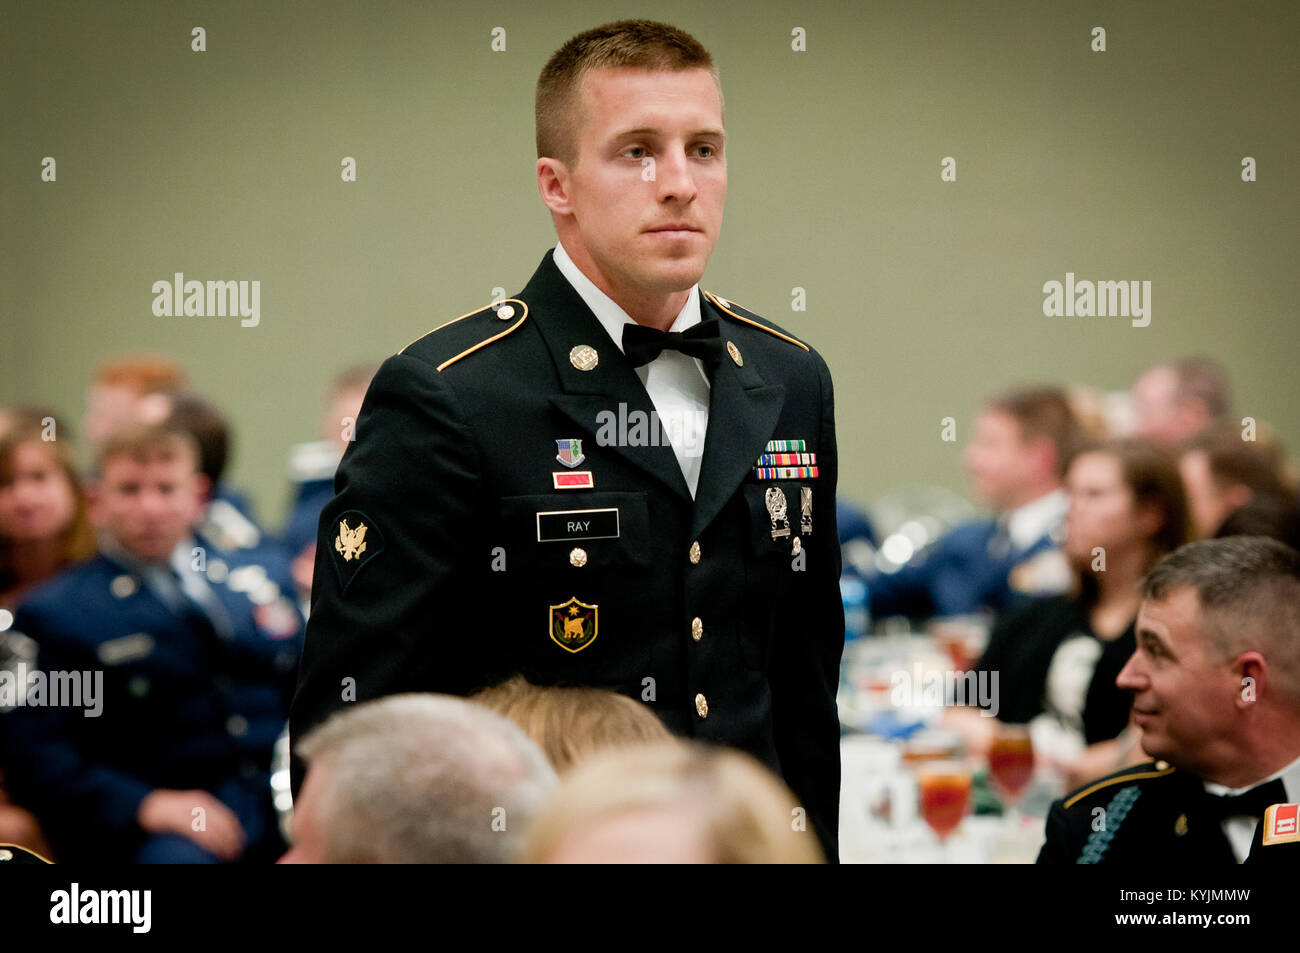 Specialist Nicholas Ray, a combat medic with the 617th Military Police Company, stands at attention during the Outstanding Airman and Soldier of the Year Banquet in Louisville, Ky., on March 16, 2013. Ray is the Kentucky Army National Guard’s Outstanding Soldier of the Year for 2013. (U.S. Air Force photo by Staff Sgt. Maxwell Rechel) Stock Photo